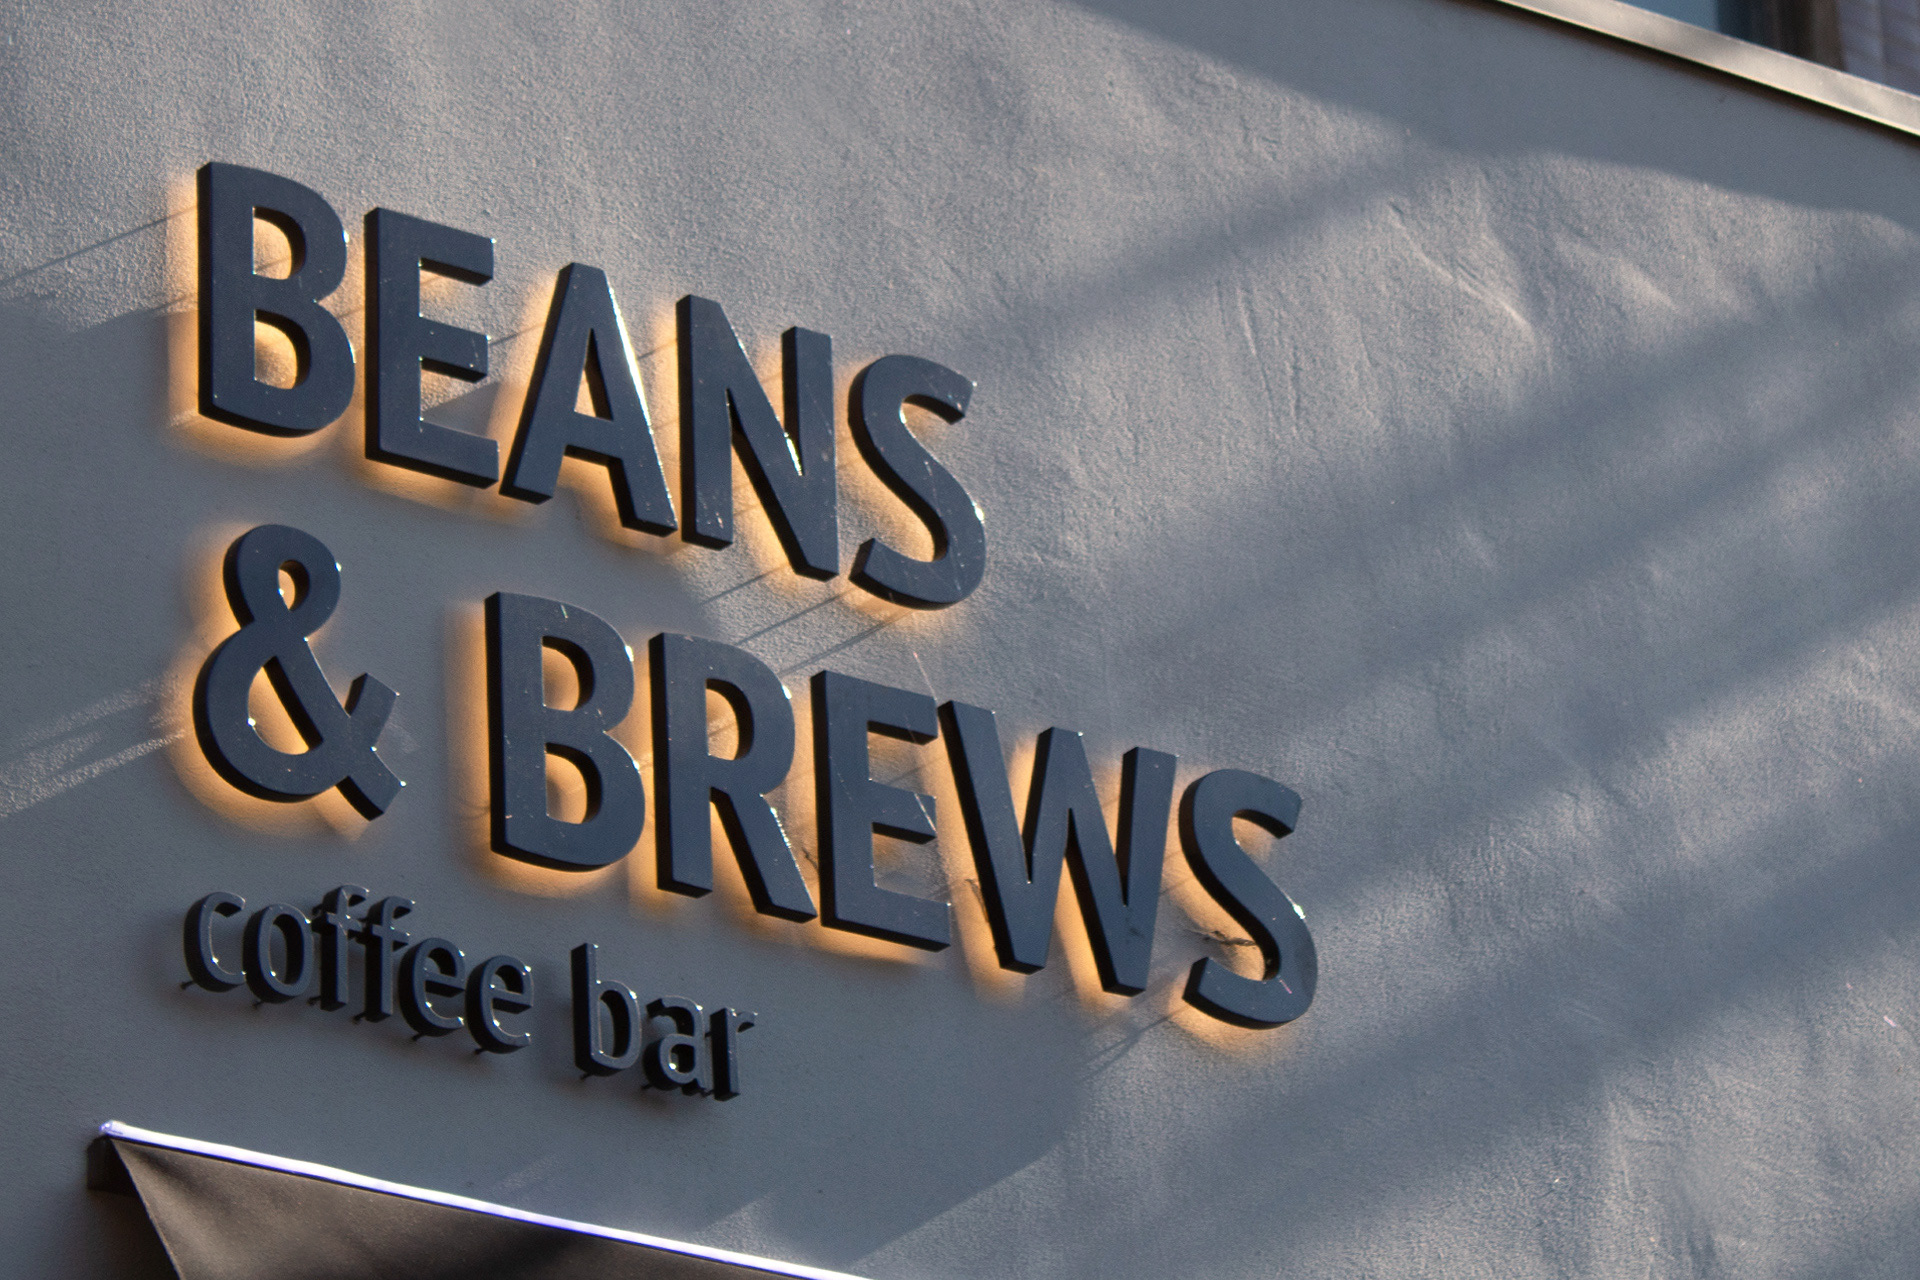 Beans & Brews Coffee Bar Branding By Canape Agency